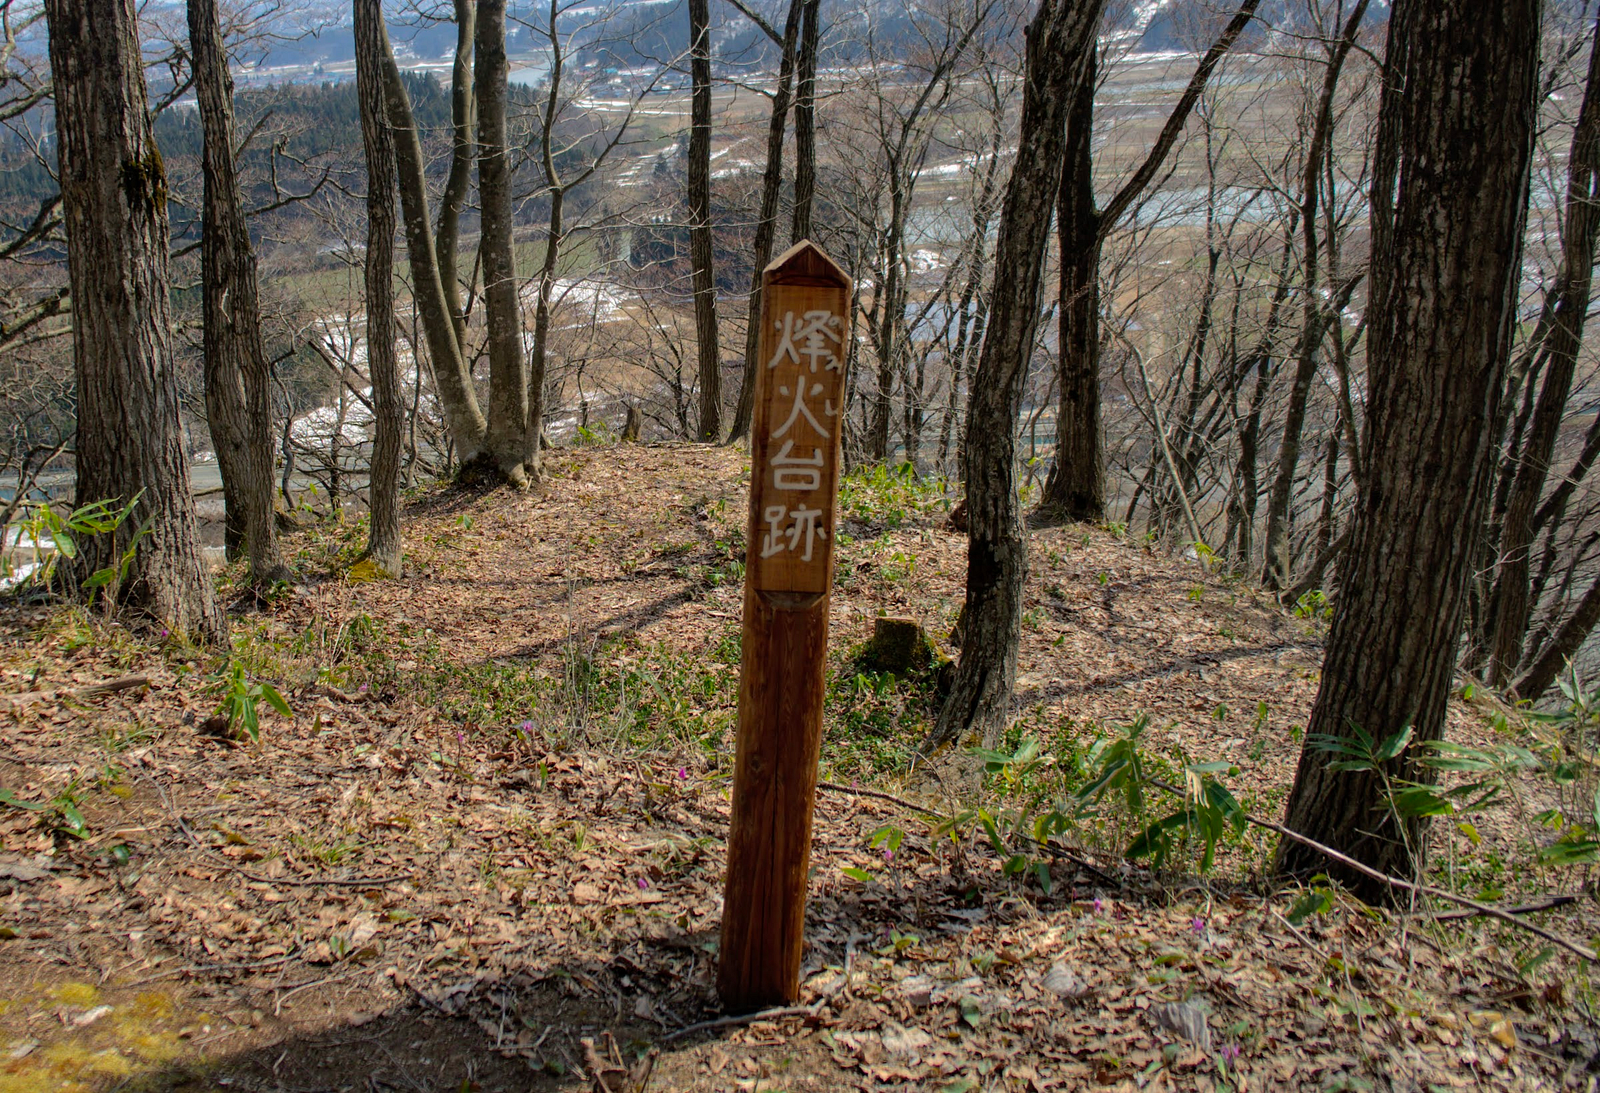 A post in the foreground signifying the location where Mt. Yamuki’s smoke signals were made.